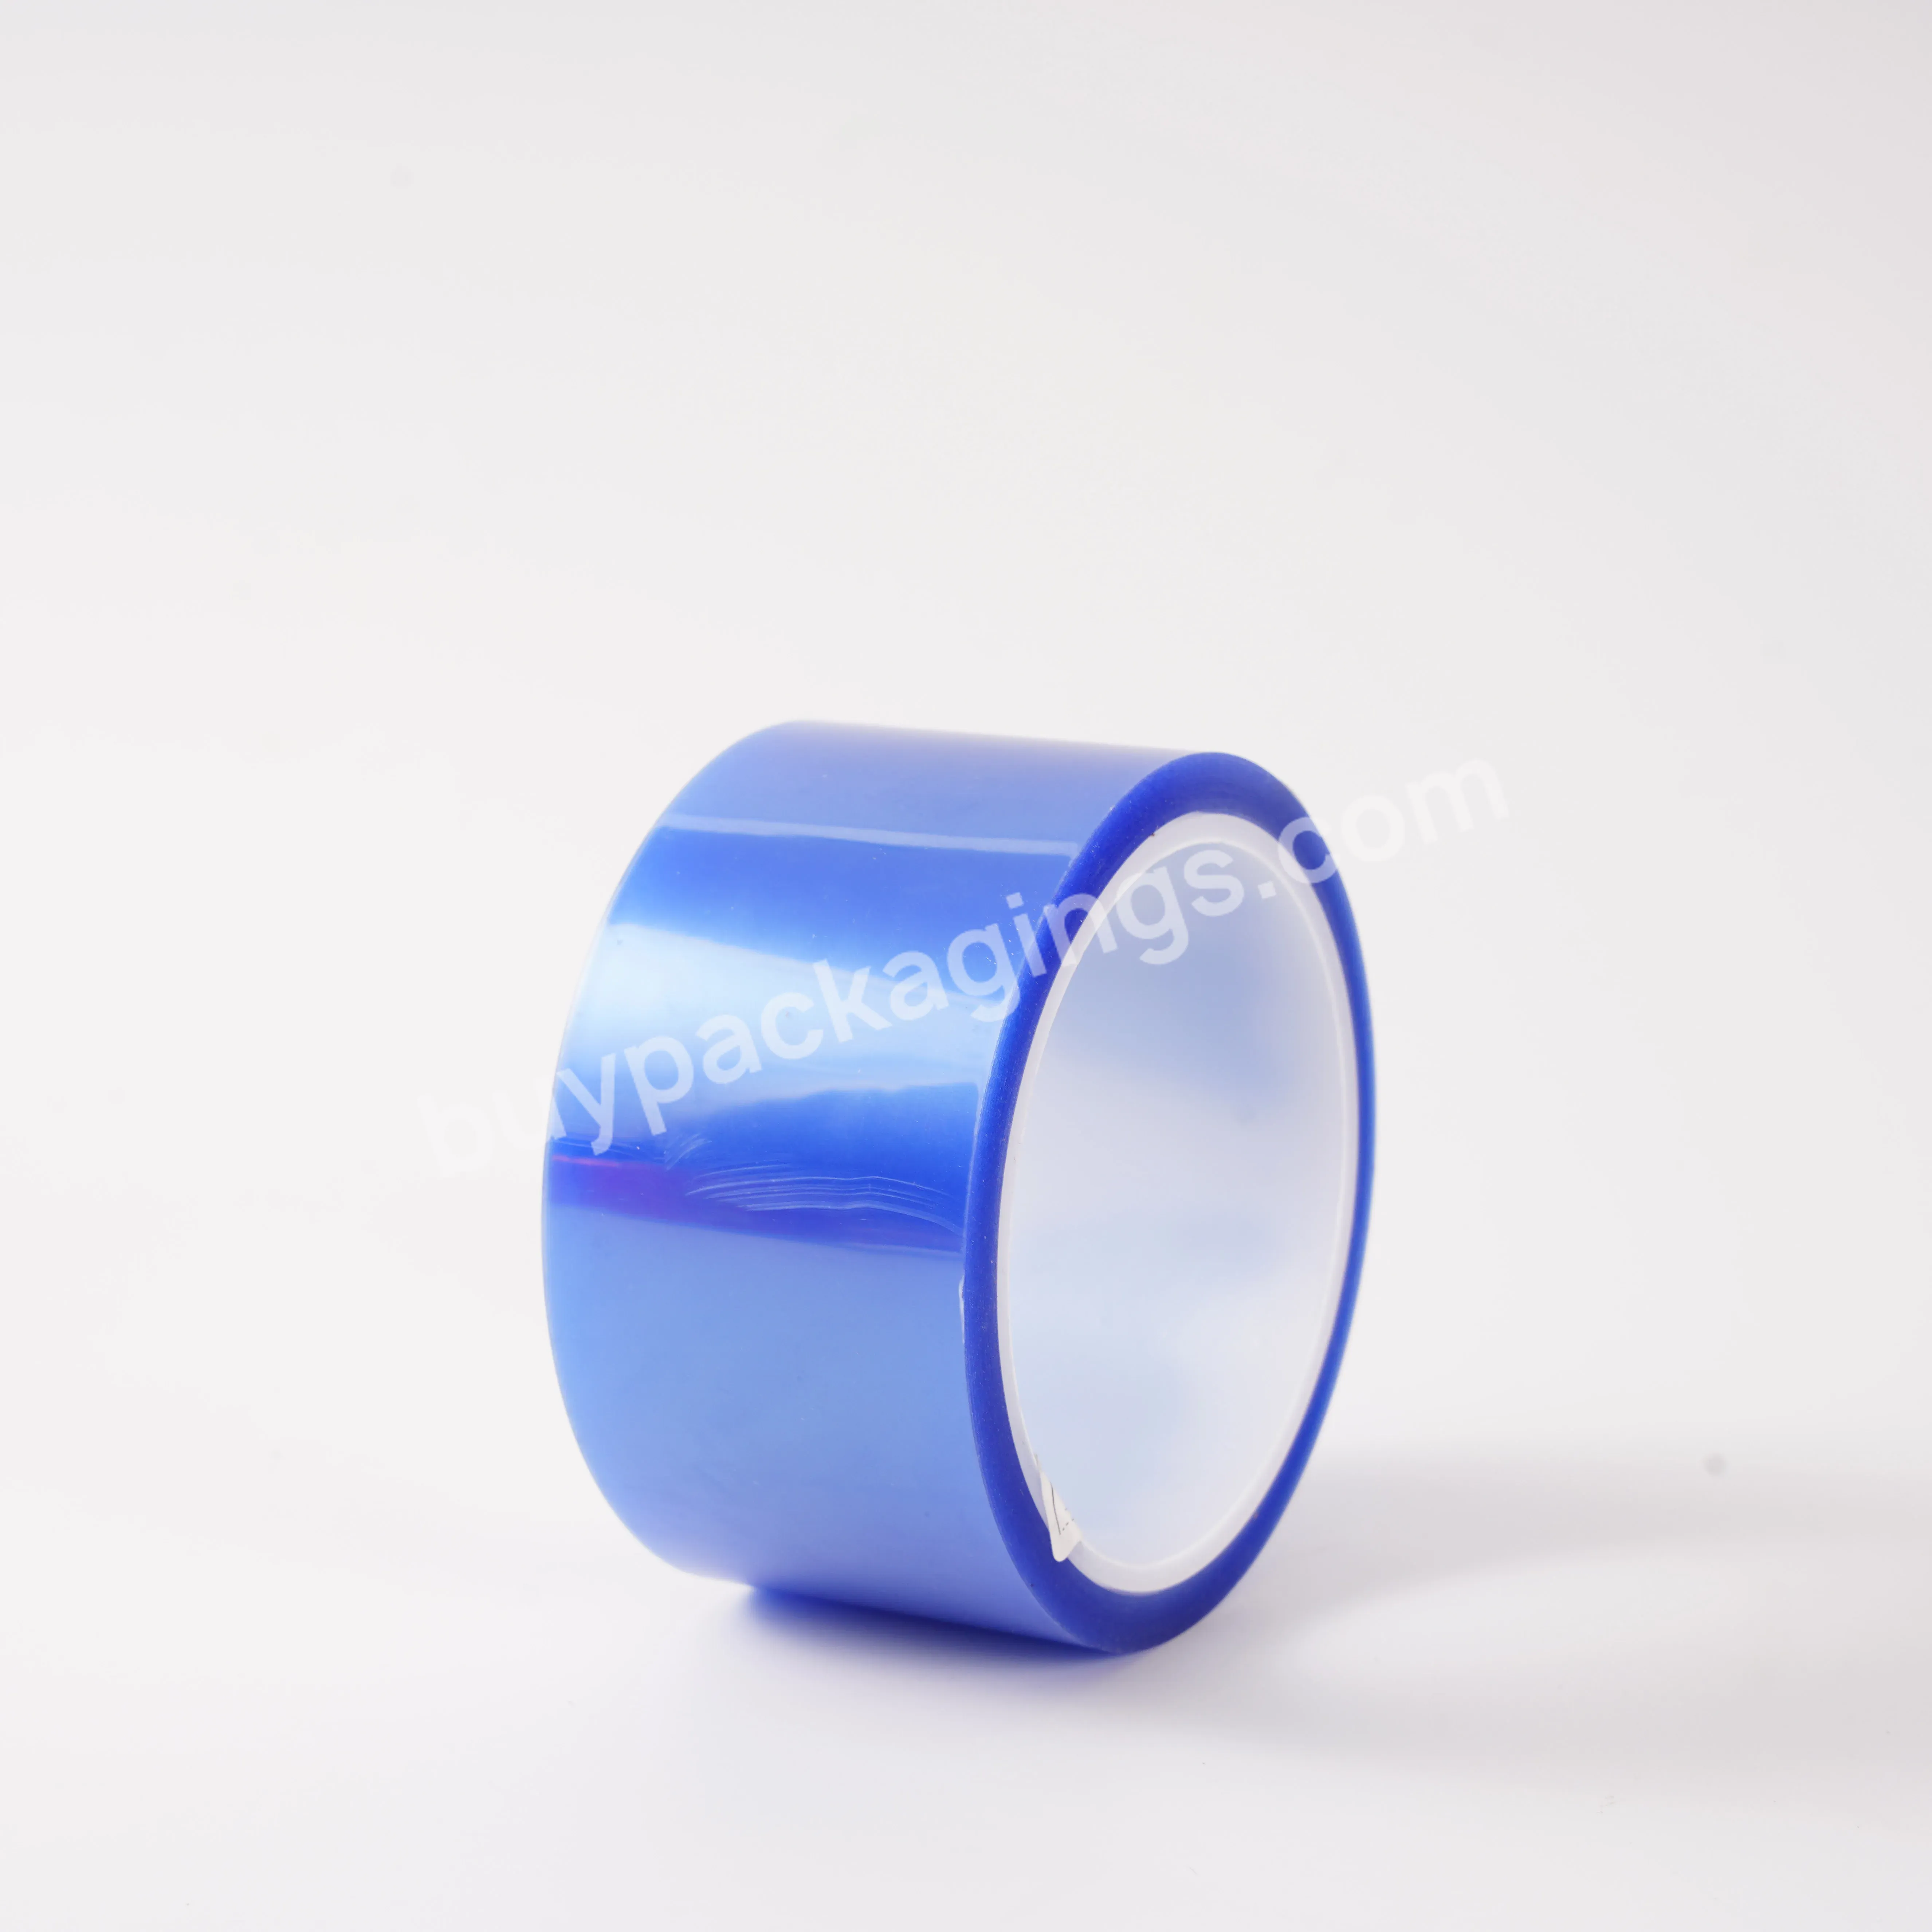 High Temperature Without Deformation,Soft And Easy To Clean High Temperature Resistant Tape - Buy Without Deformation,High Temperature Resistant Tape,Soft And Easy To Clean.